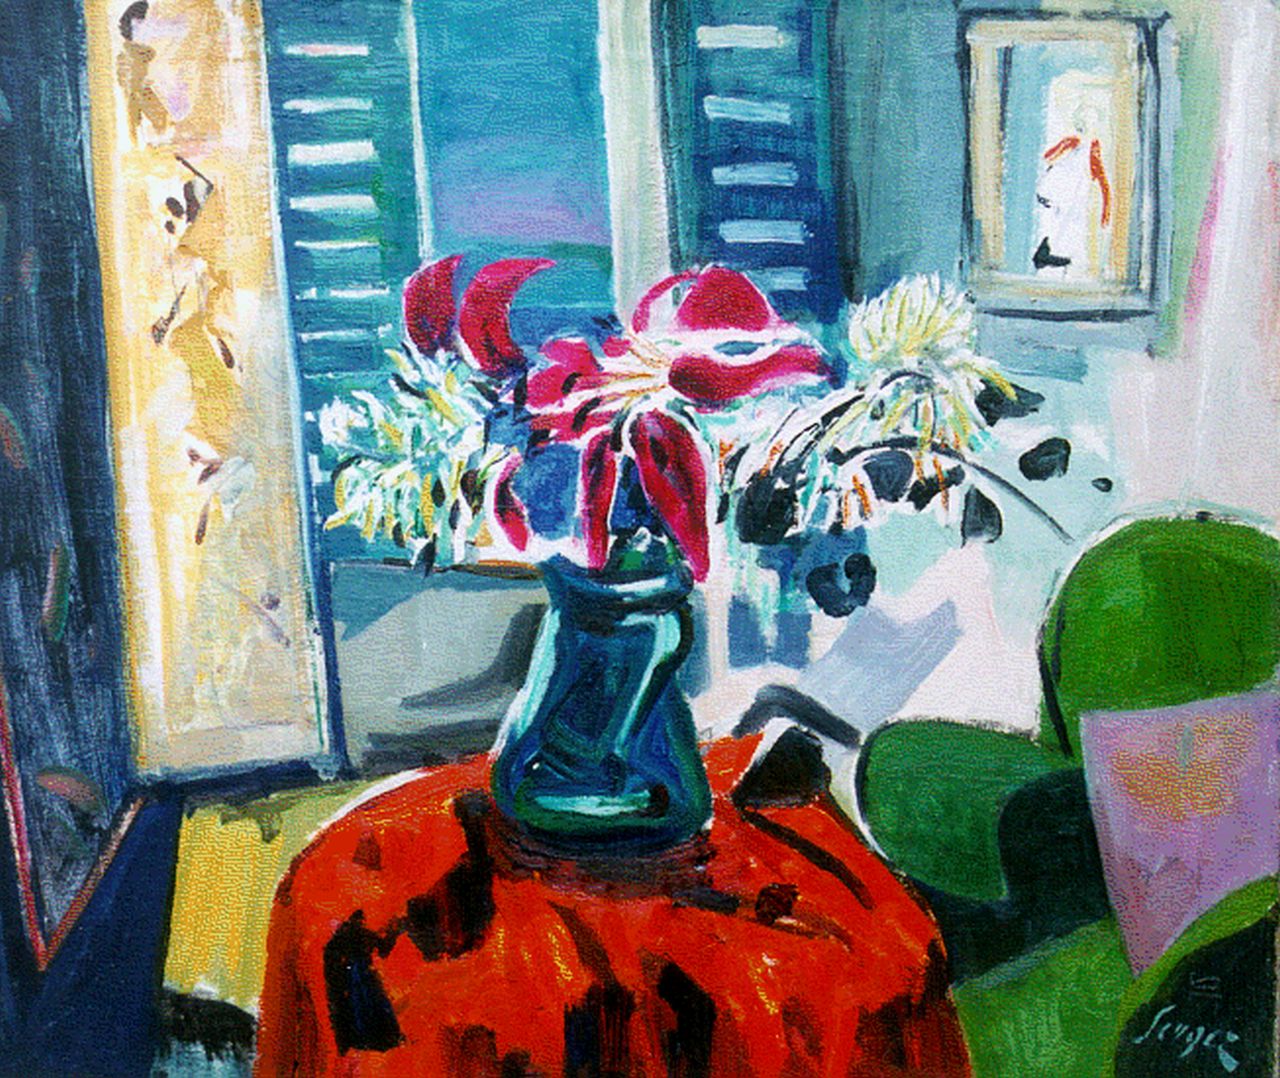 Serger F.B.  | Frederick Bedrich Serger, A flower still life, oil on canvas 53.7 x 63.8 cm, signed l.r. and painted in 1956